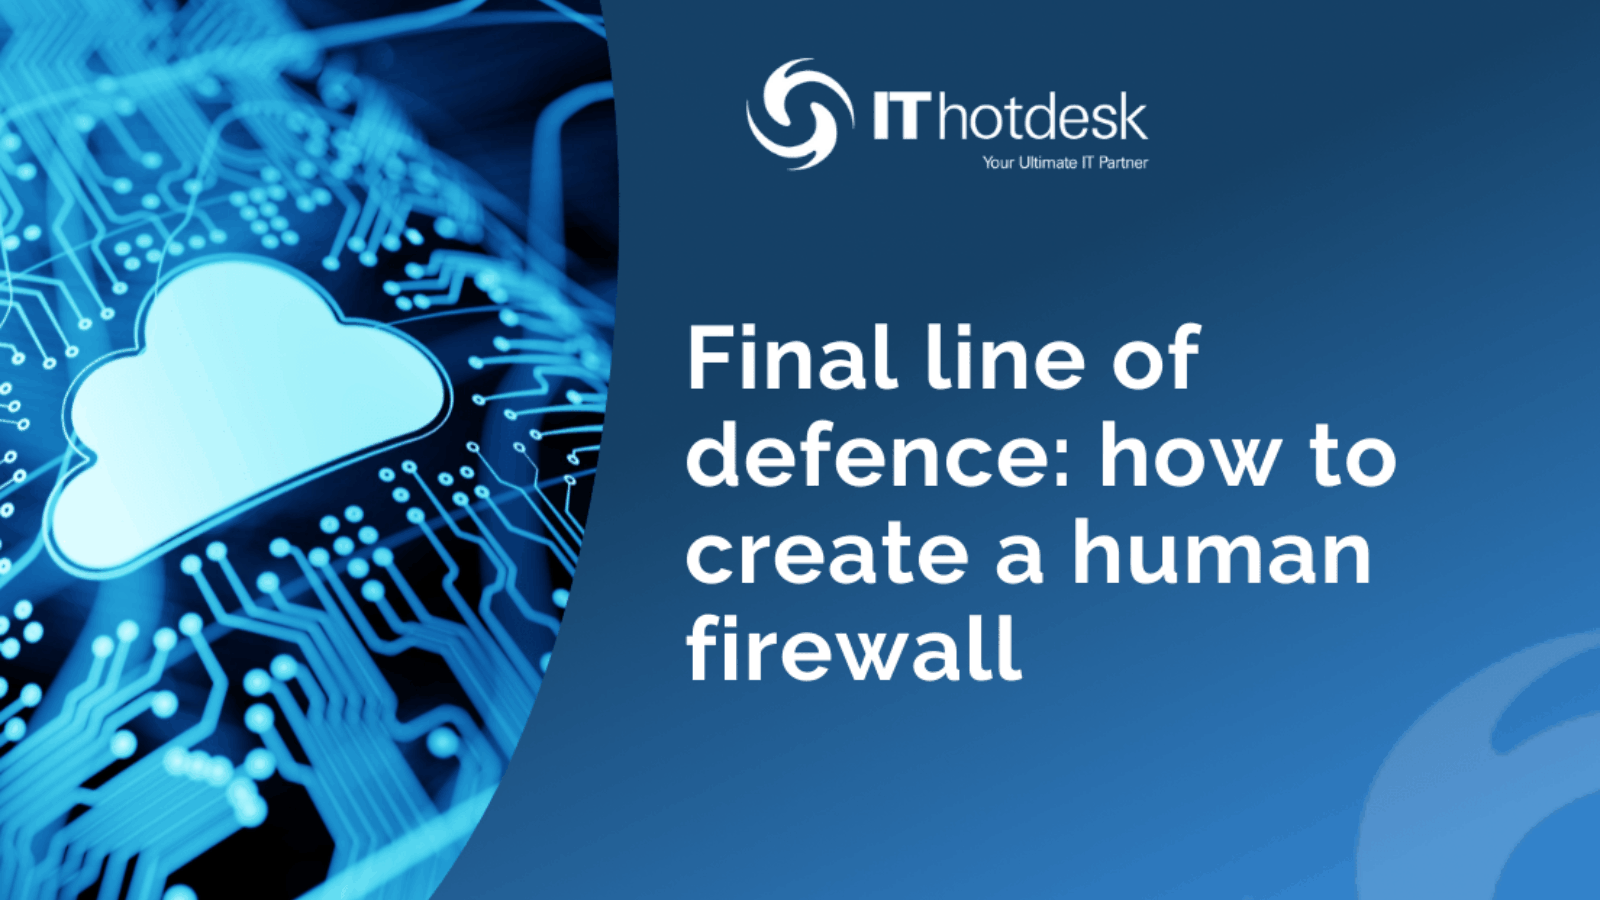 Final line of defence: how to create a human firewall